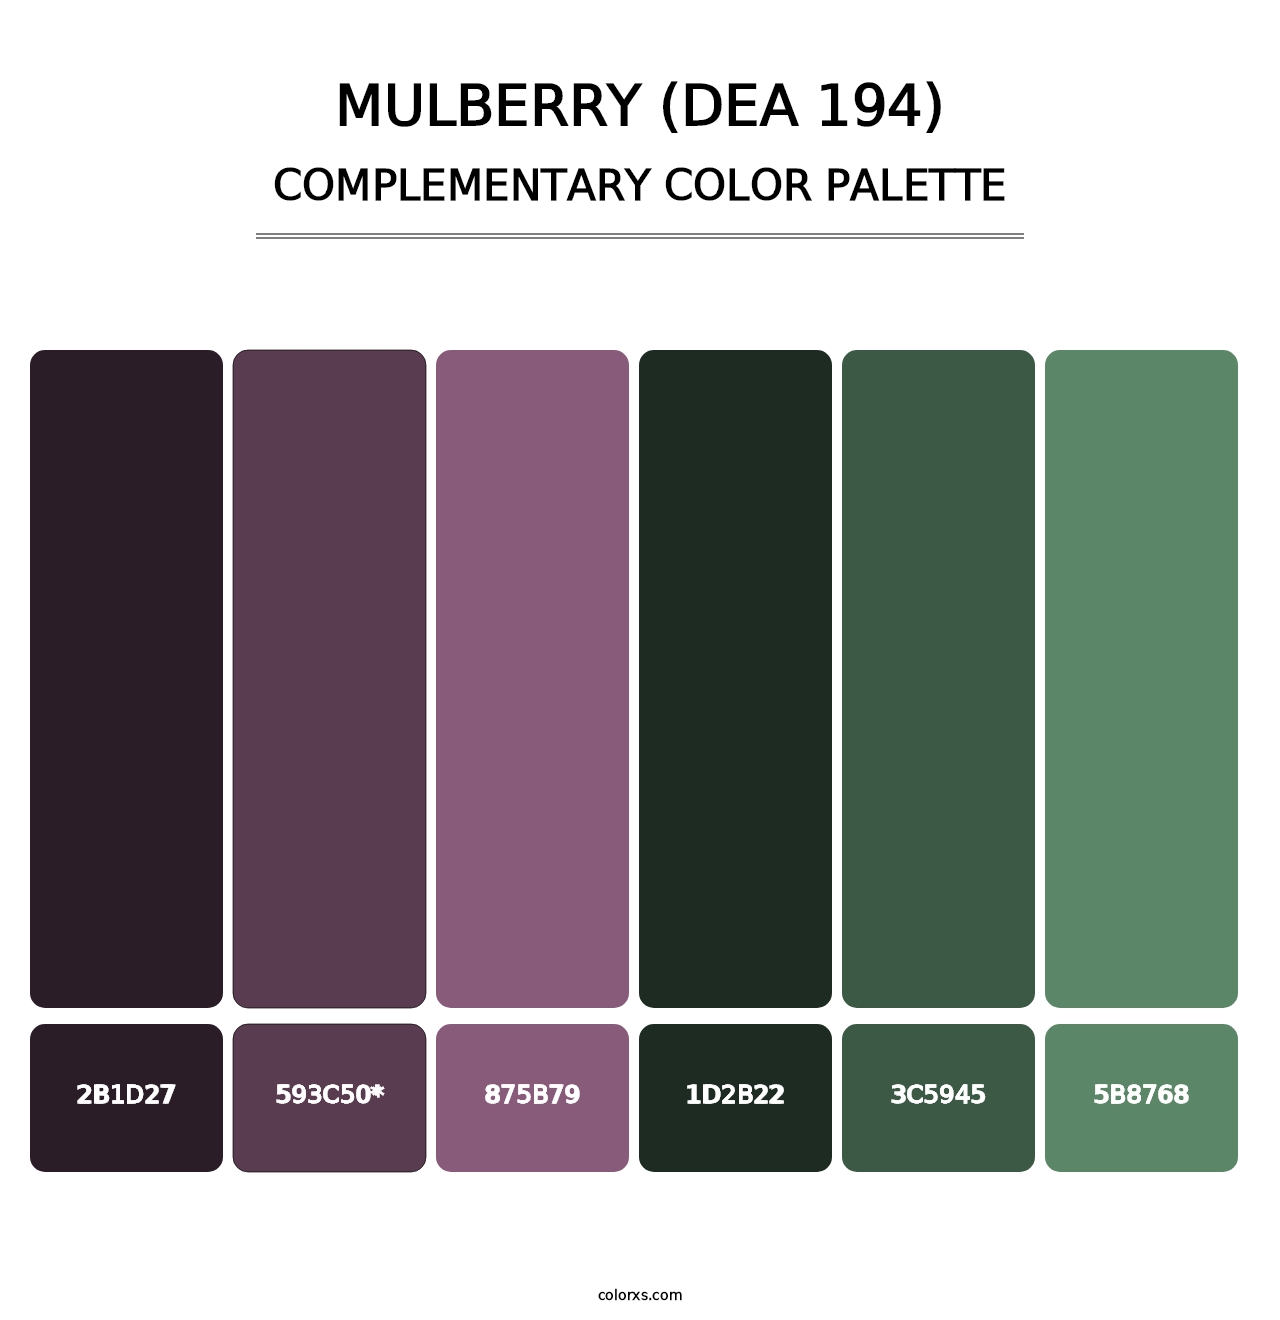 Mulberry (DEA 194) - Complementary Color Palette